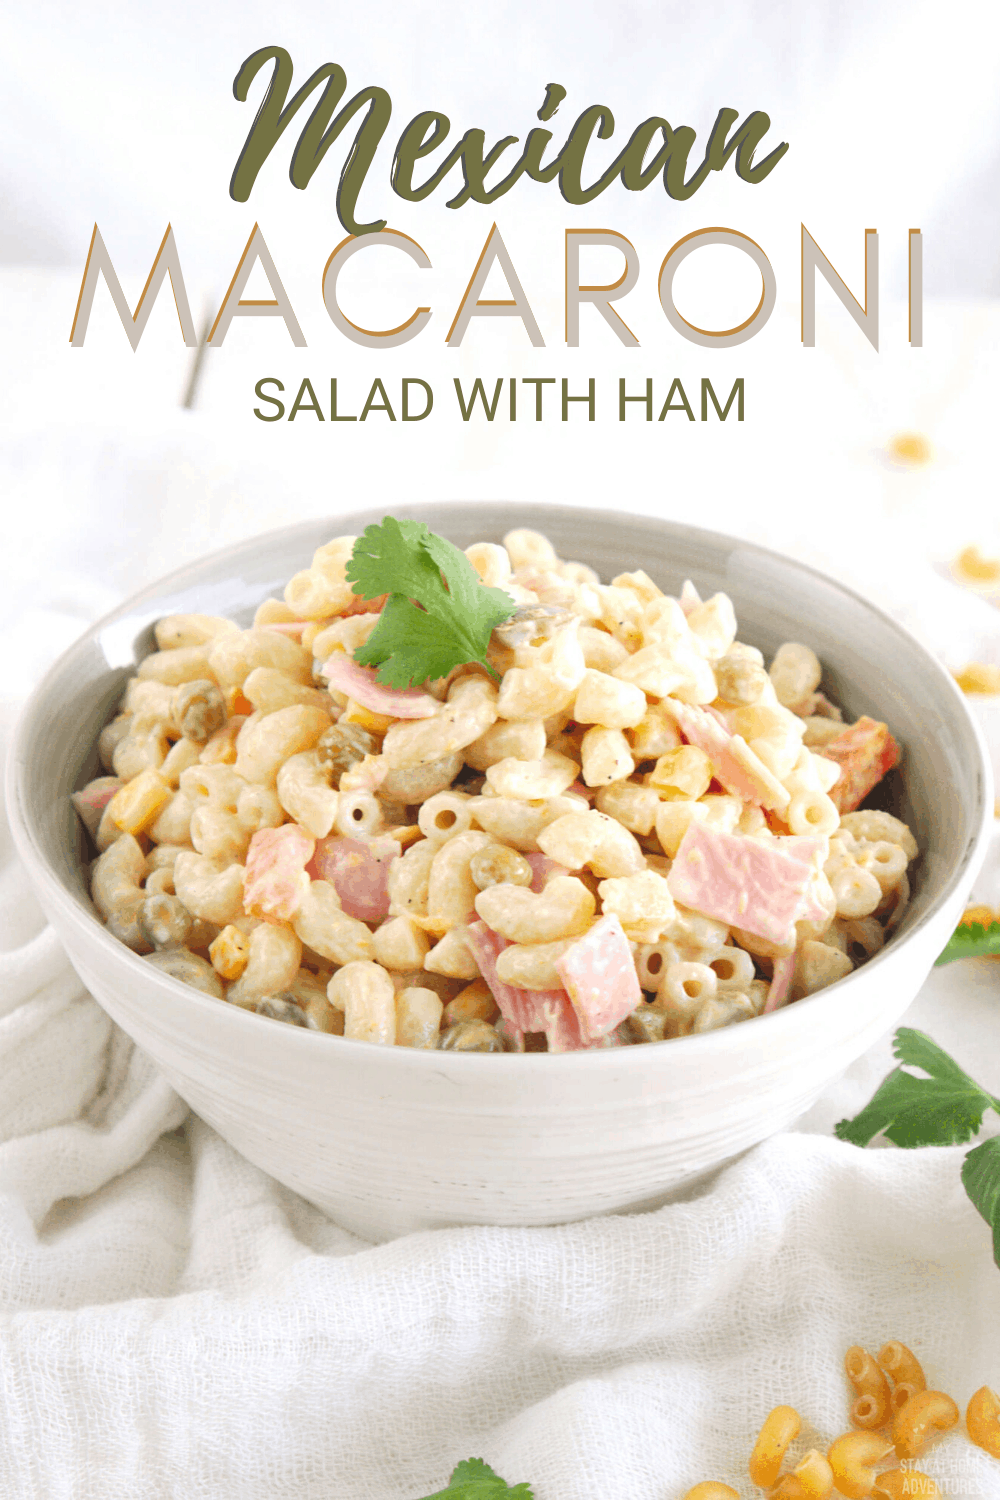 Mexican Macaroni Salad recipe it's an authentic, simple and flavorful pasta dish that comes together with ingredients you probably already have in your kitchen. Serve as a light main dish or as a side dish. #mexicanrecipe #pastasalad via @mystayathome